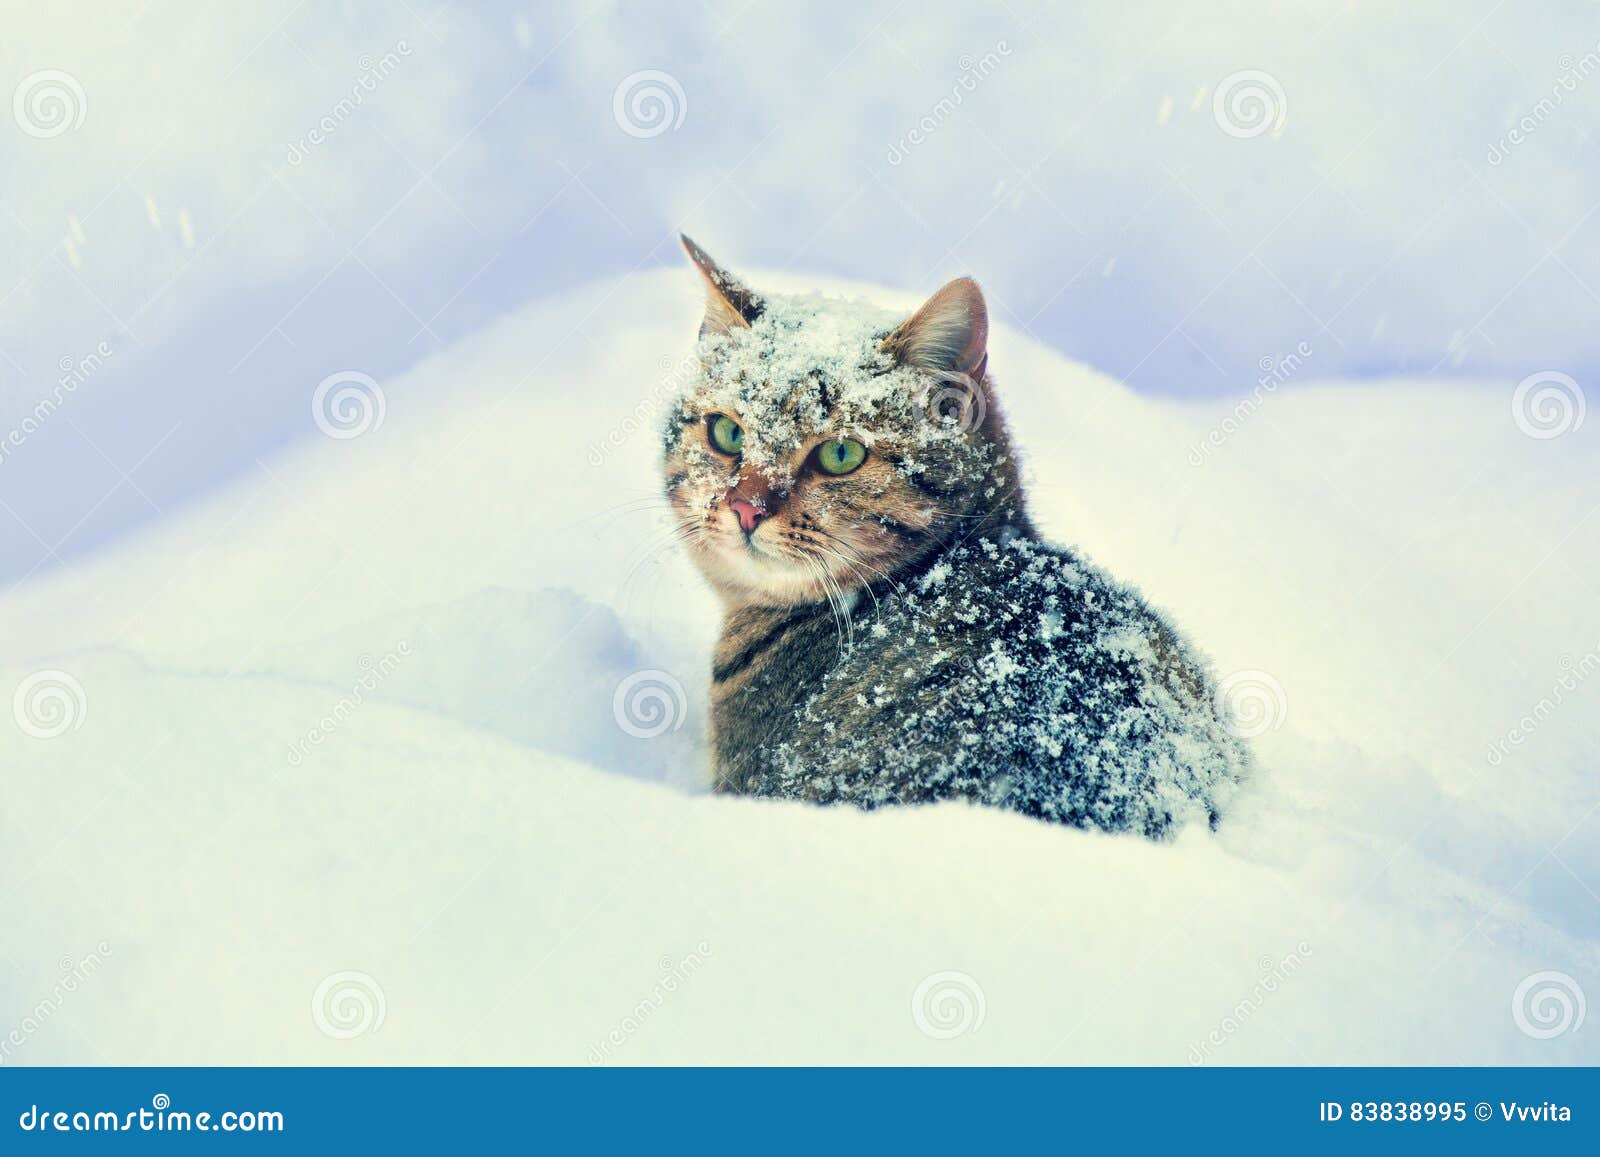 cat siting in snow